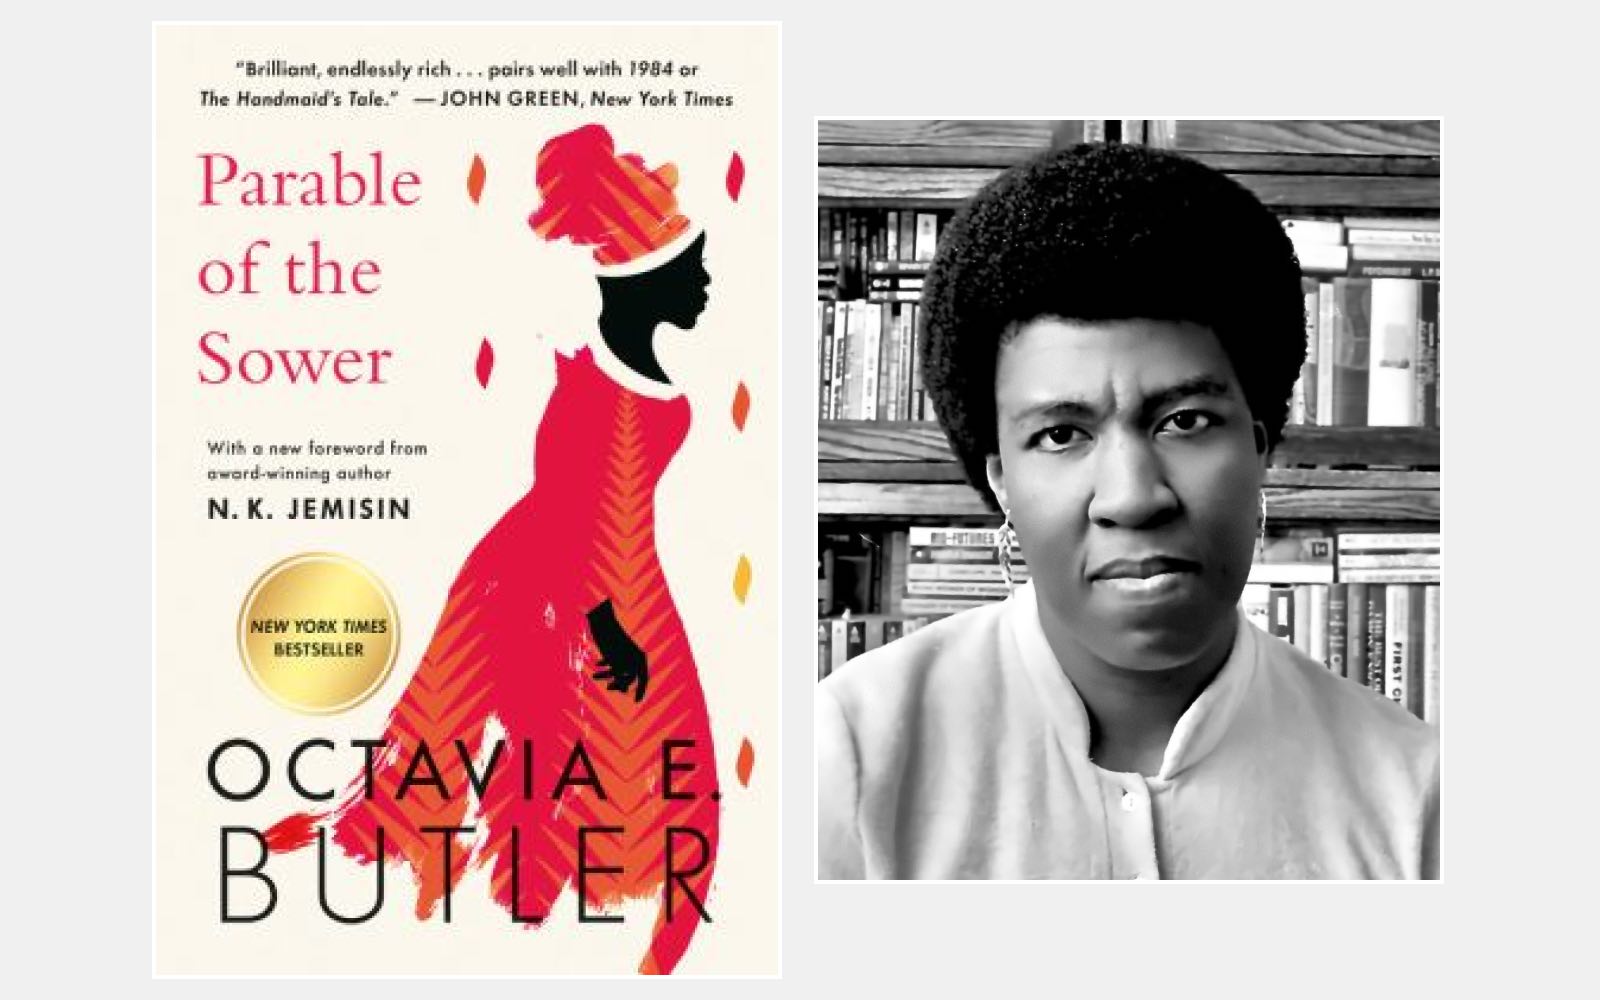 The cover of the novel Parable of the Sower next to a headshot of Octavia Butler.